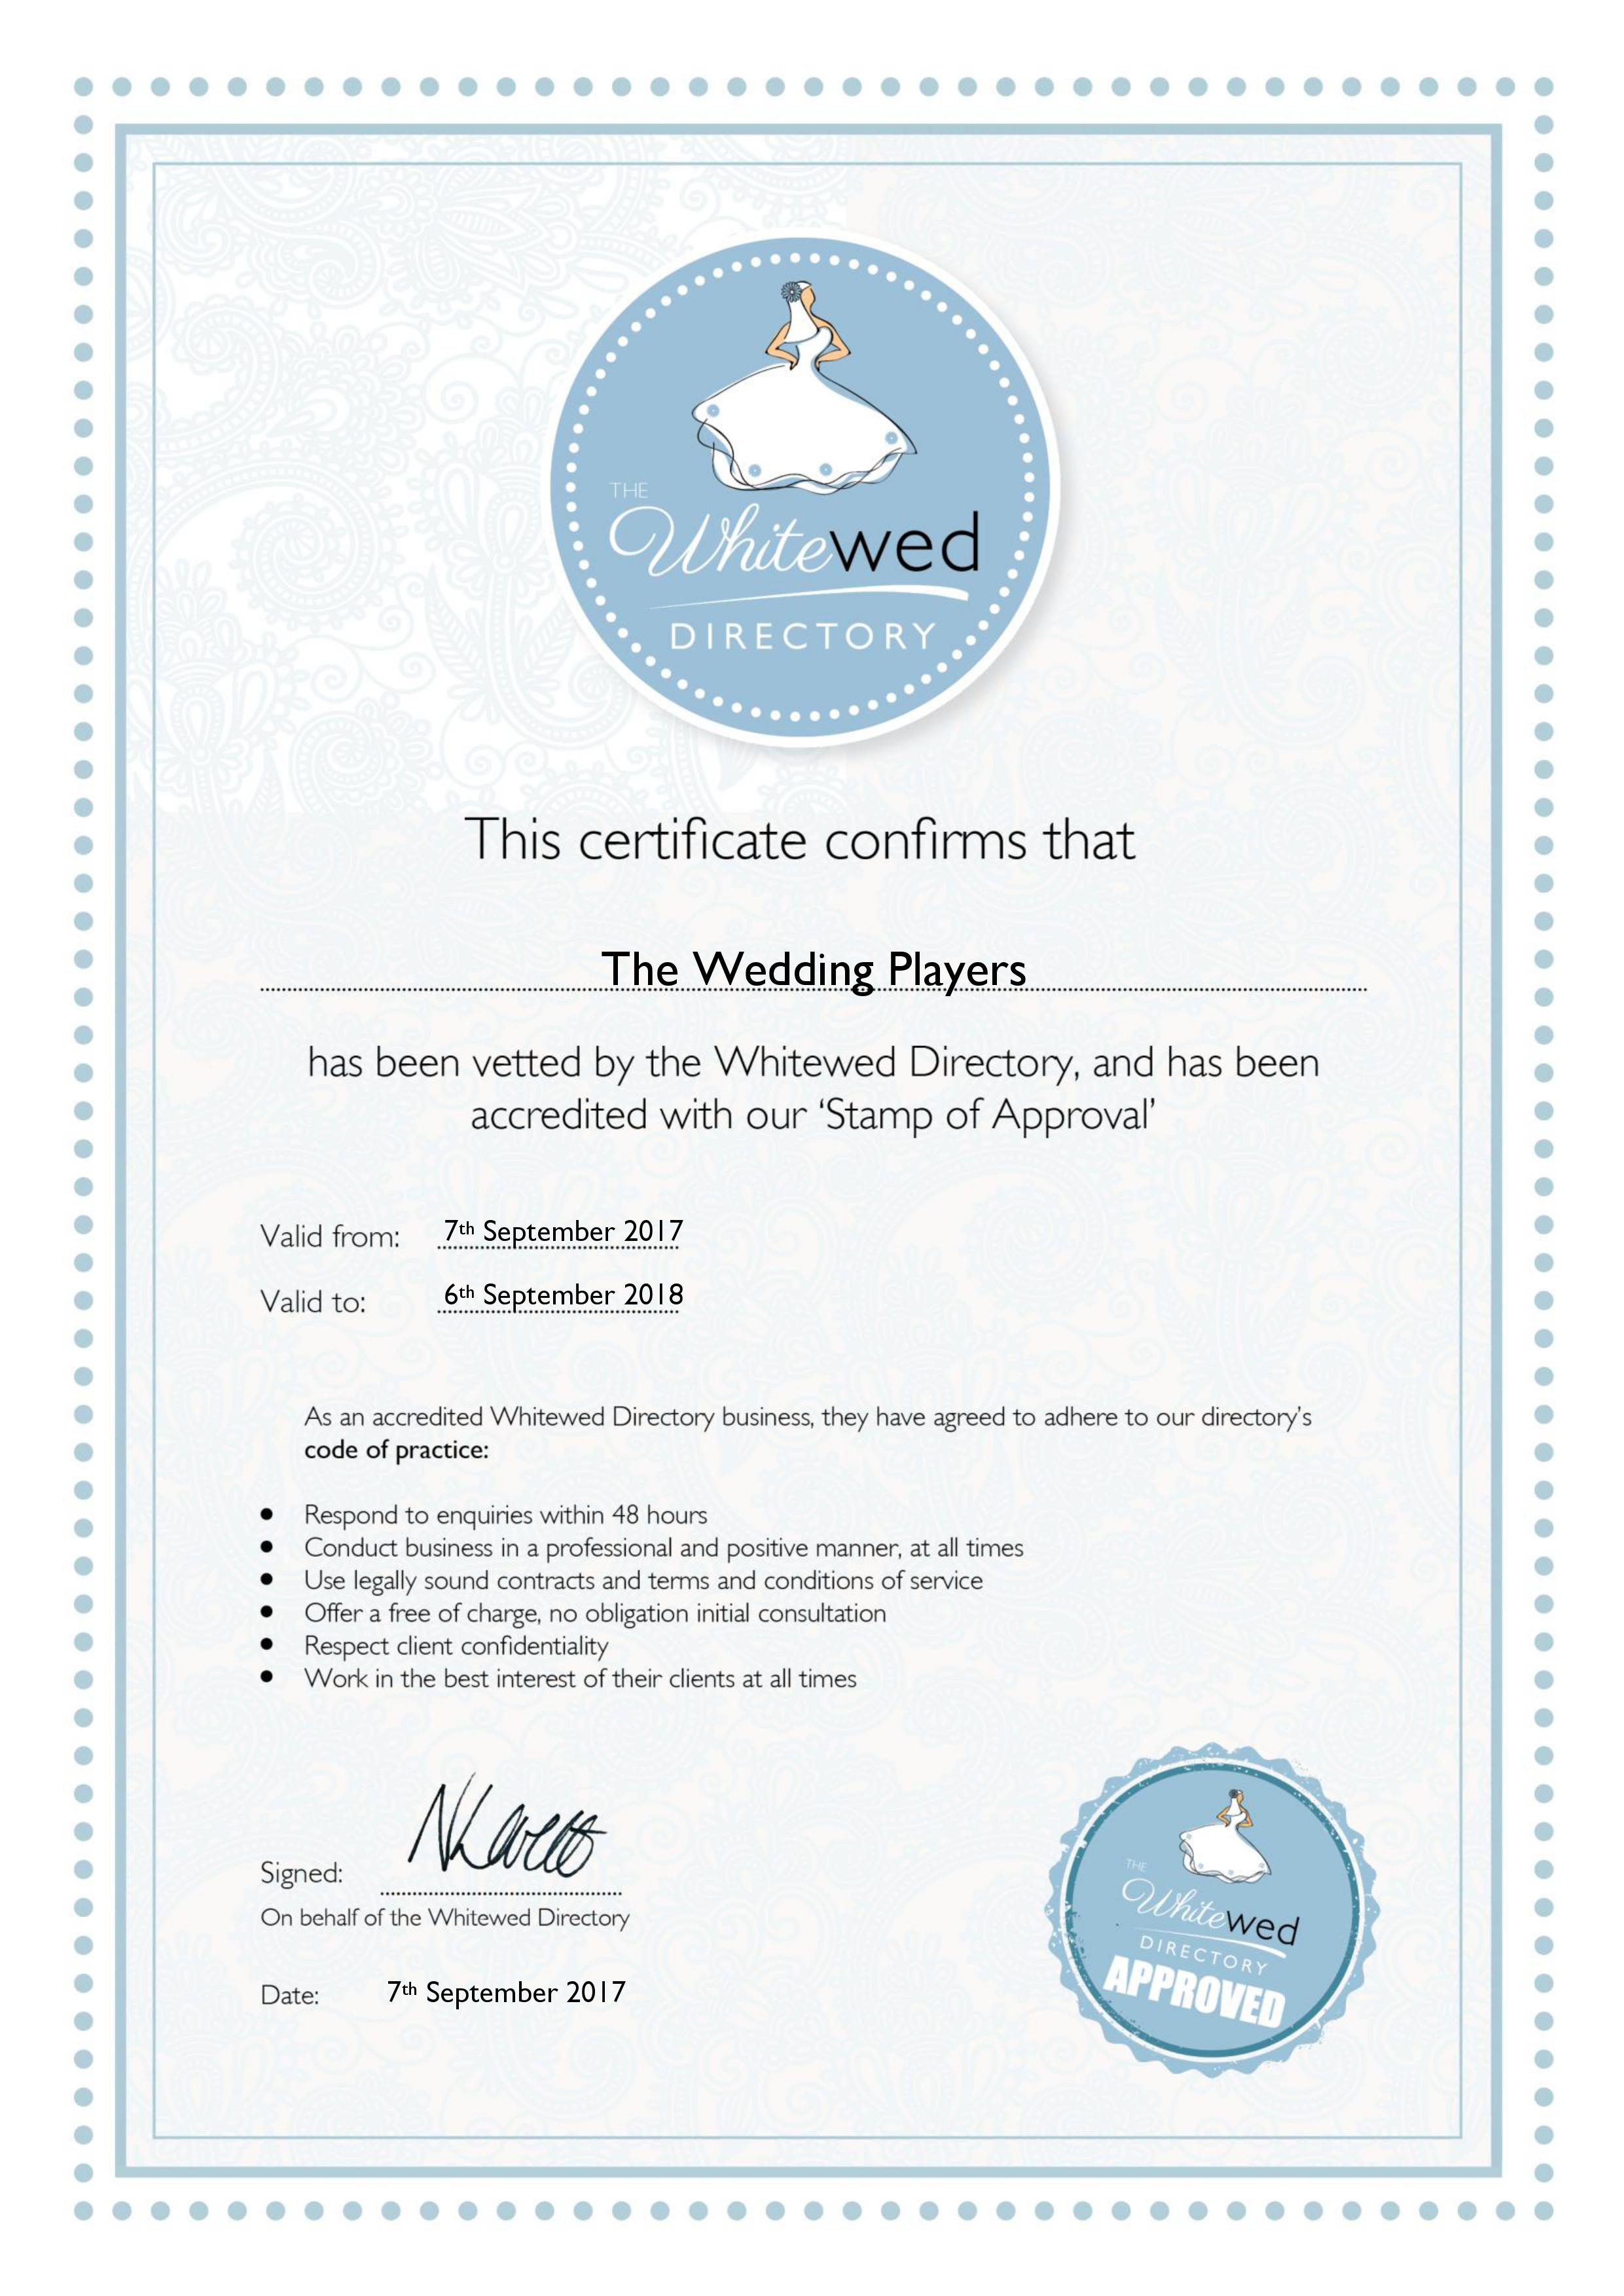 Whitewed Directory Accredited!